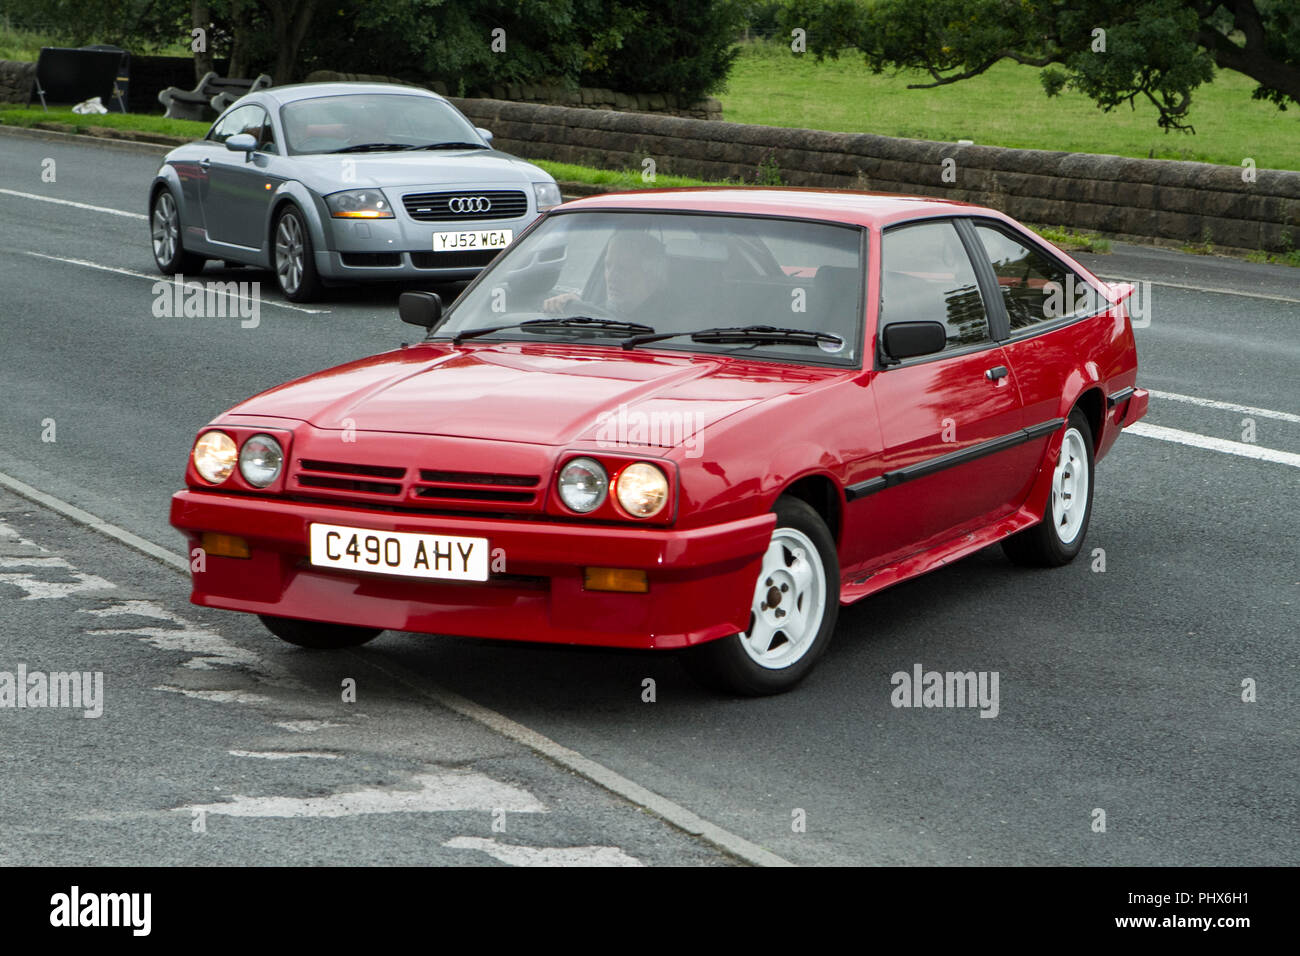 Red C490AHY 1985 Opel Manta GT at Hoghton towers annual classic vintage car rally, UK Stock Photo